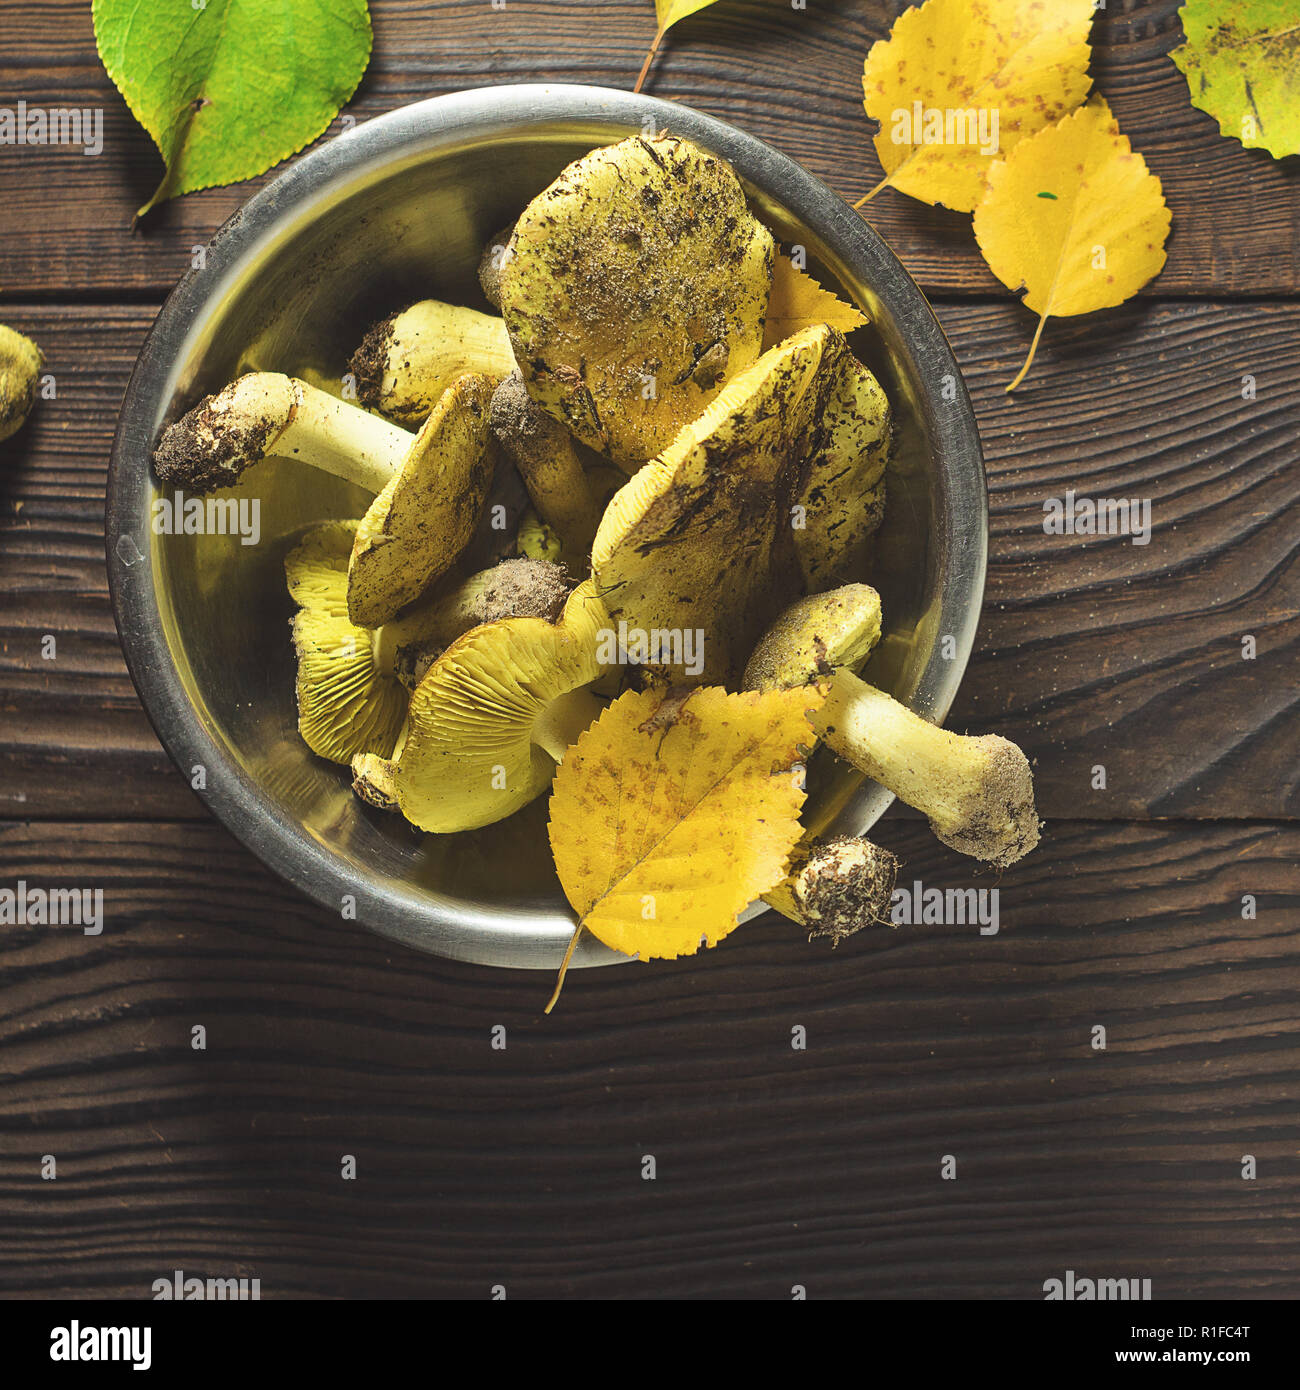 Fresh forest mushrooms tricholoma in a metal bowl on a wooden table Stock Photo